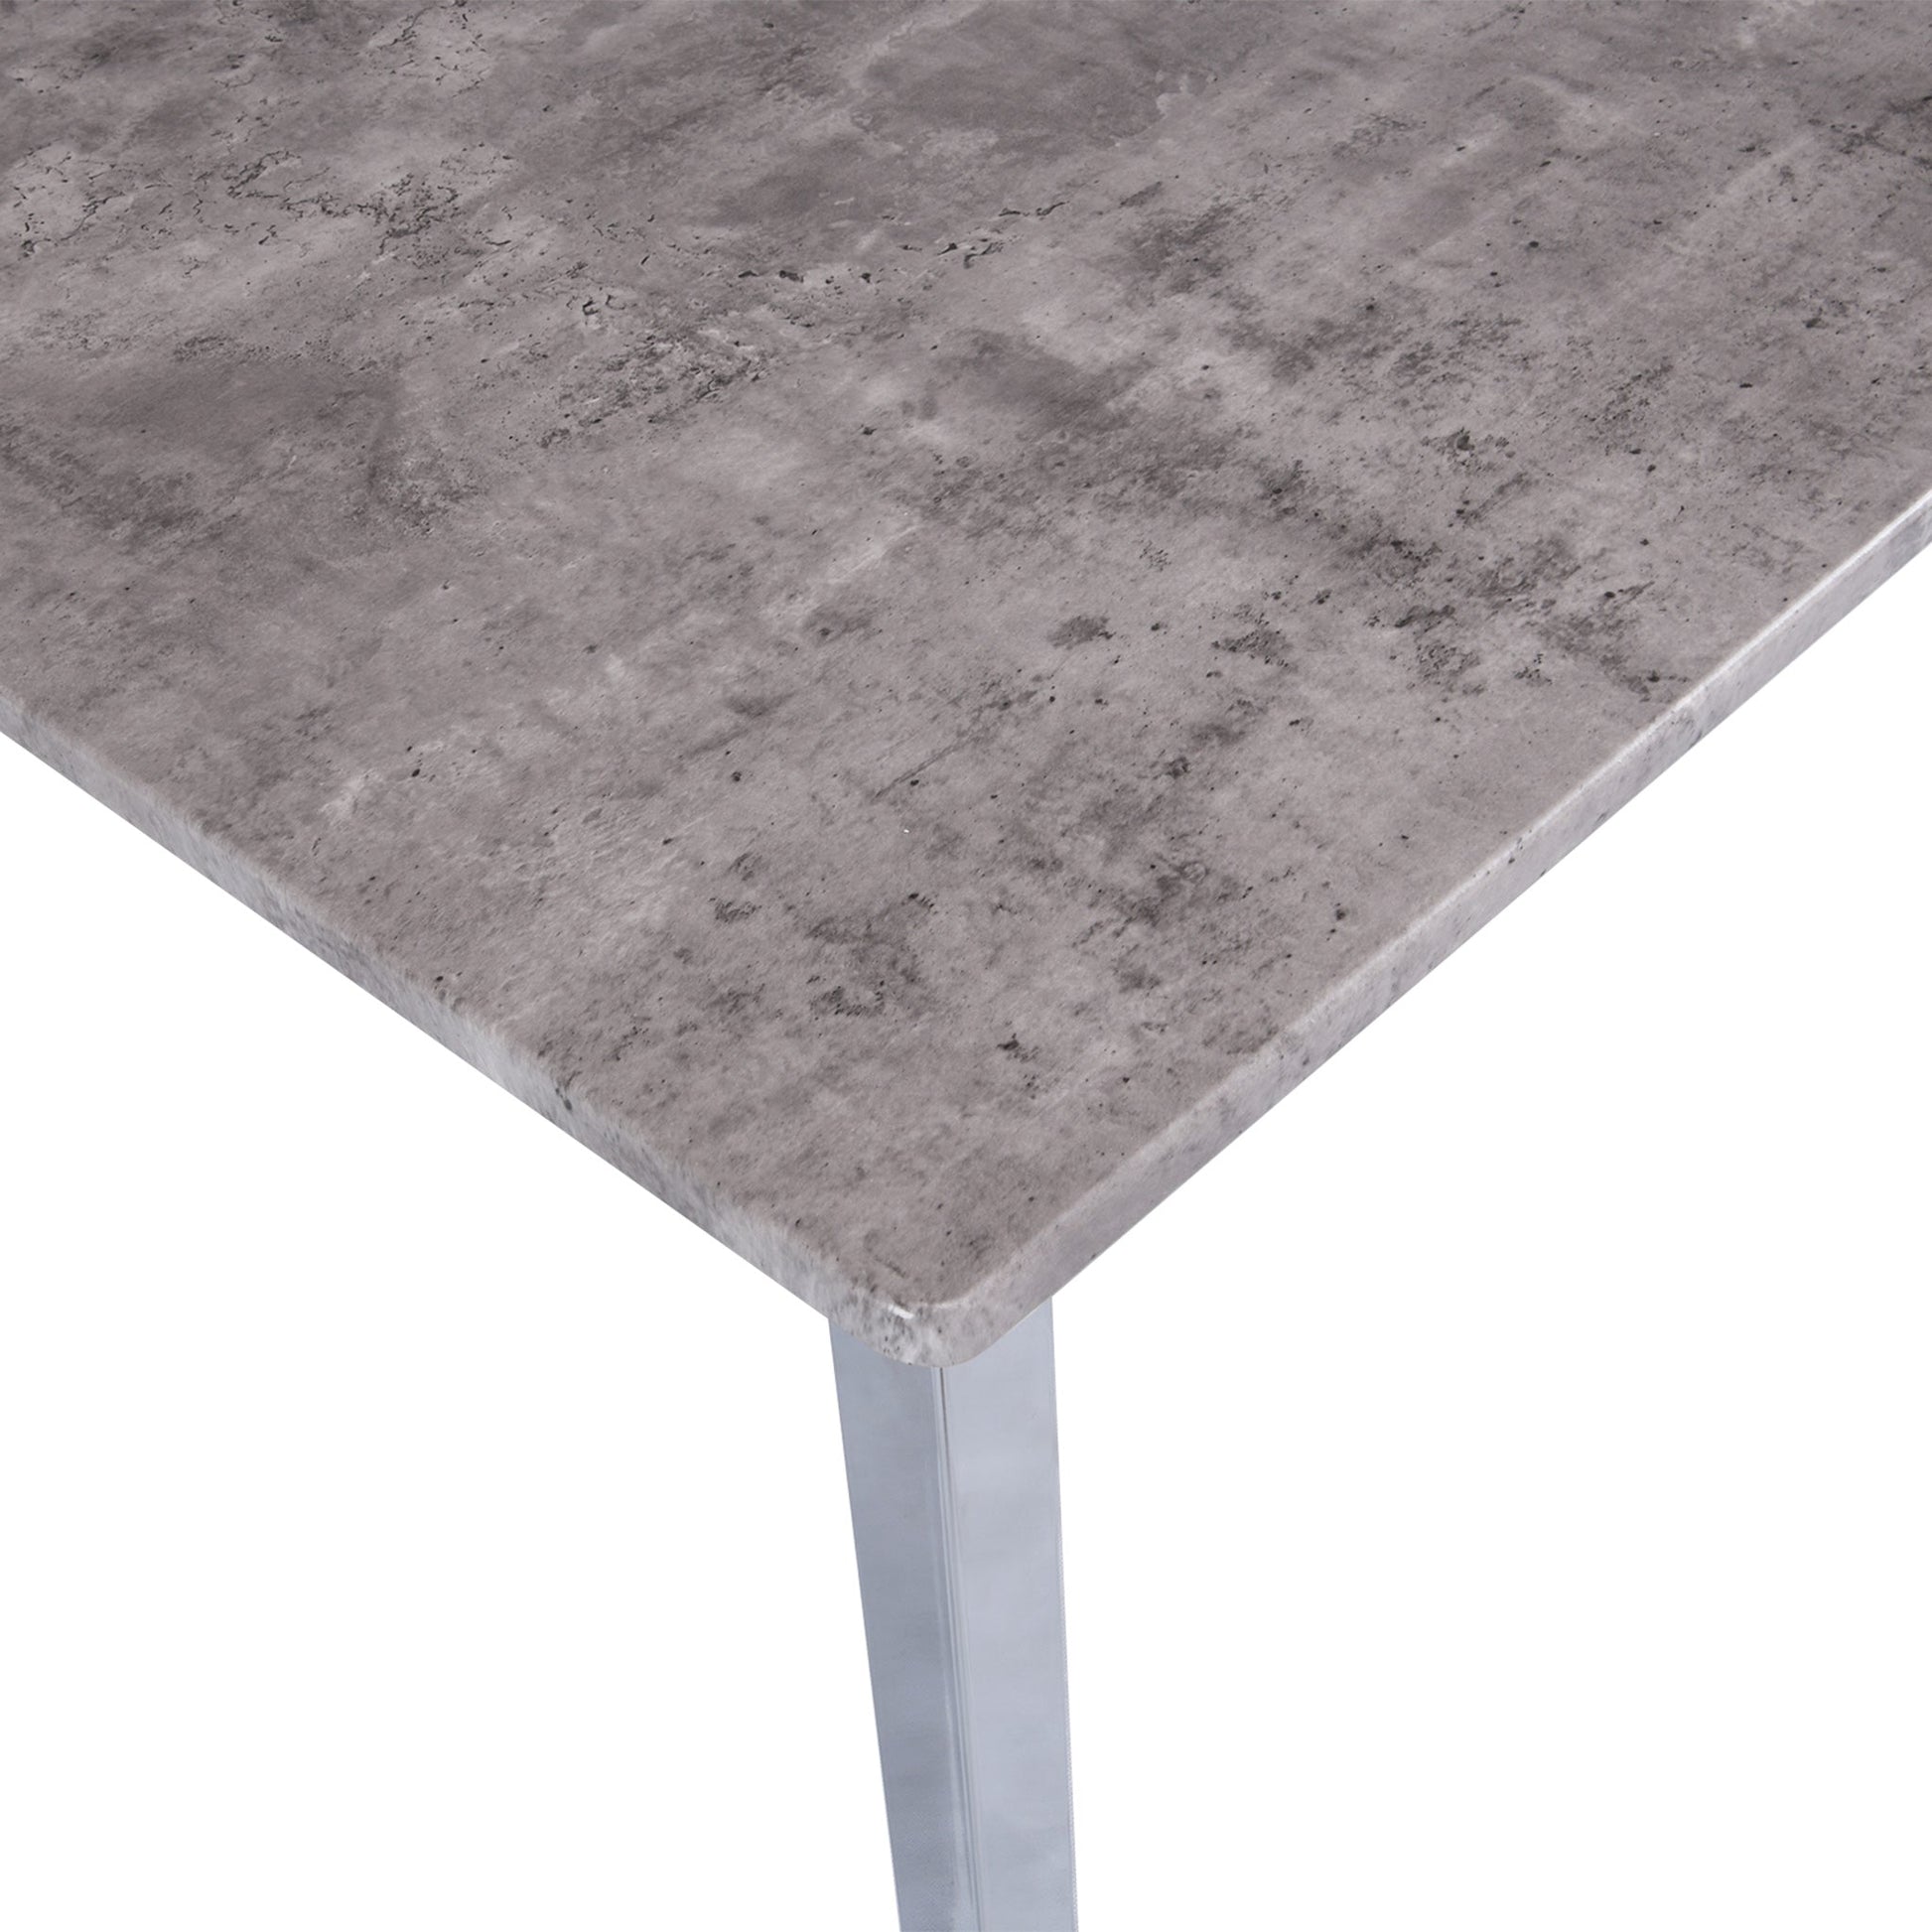 Milo dining table - 4 seater - concrete effect and chrome - Laura James